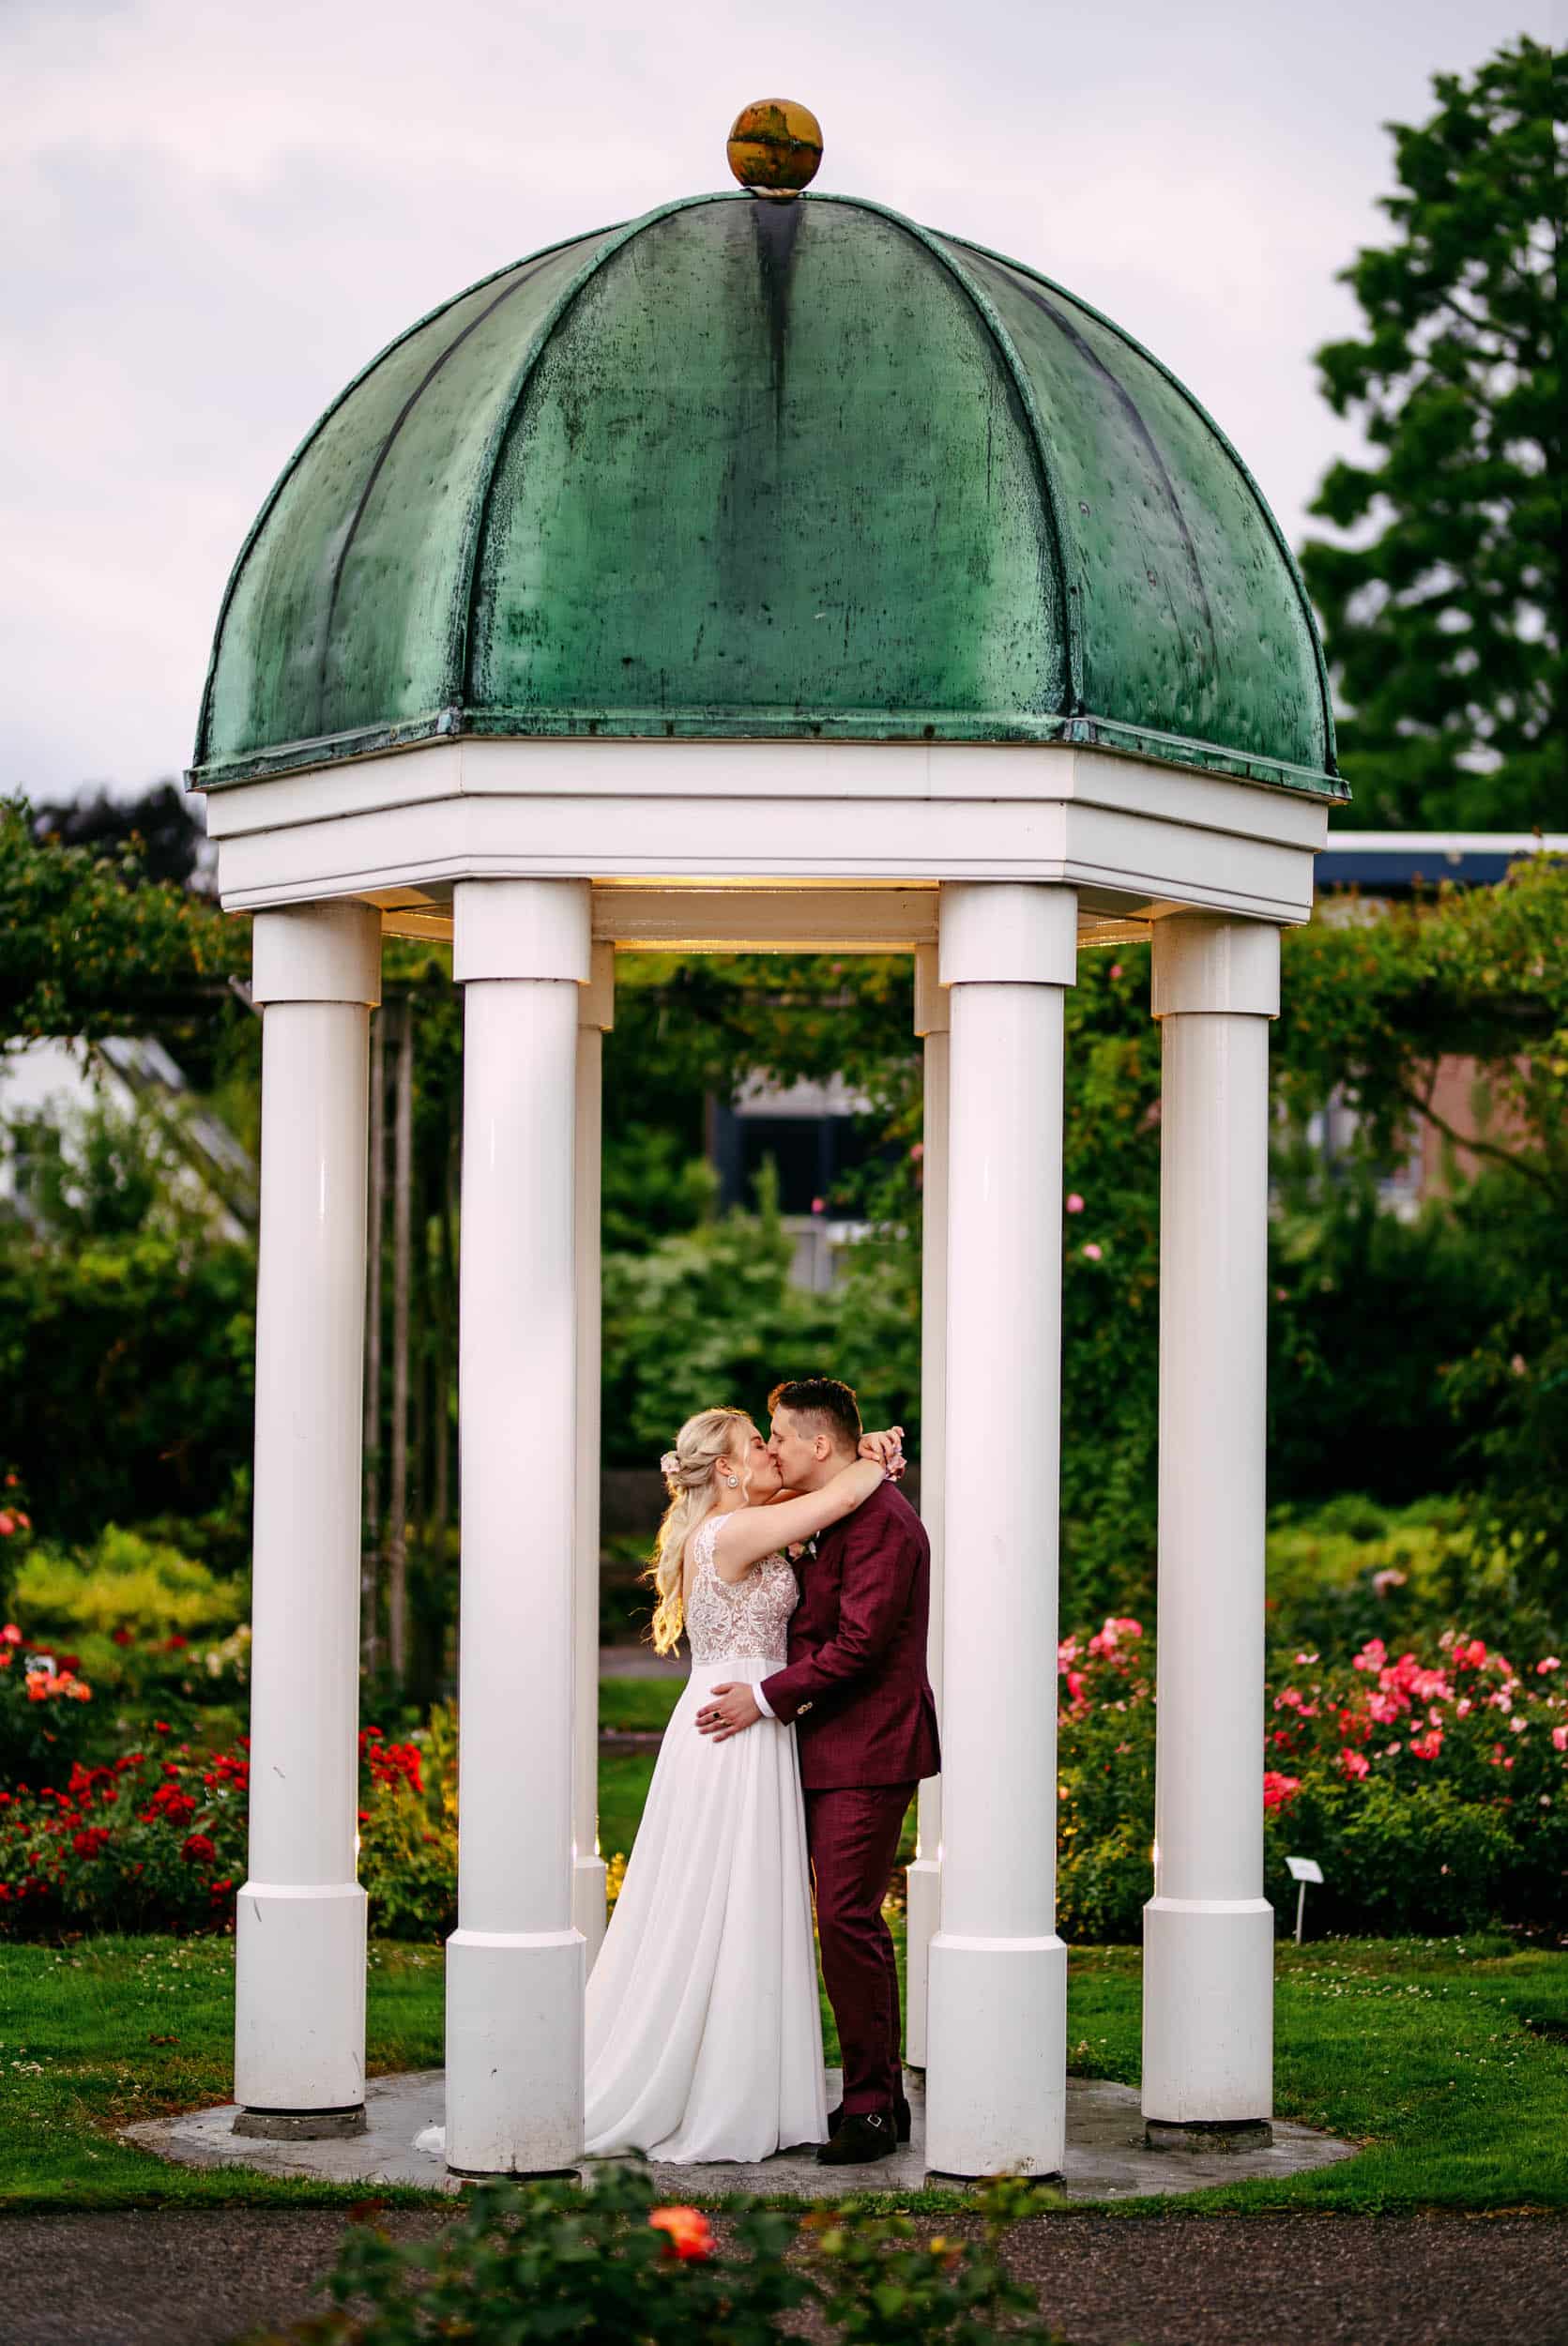 A bride and groom share a romantic kiss under an arbour in a beautifully landscaped garden, adding a historical element to their wedding celebration.